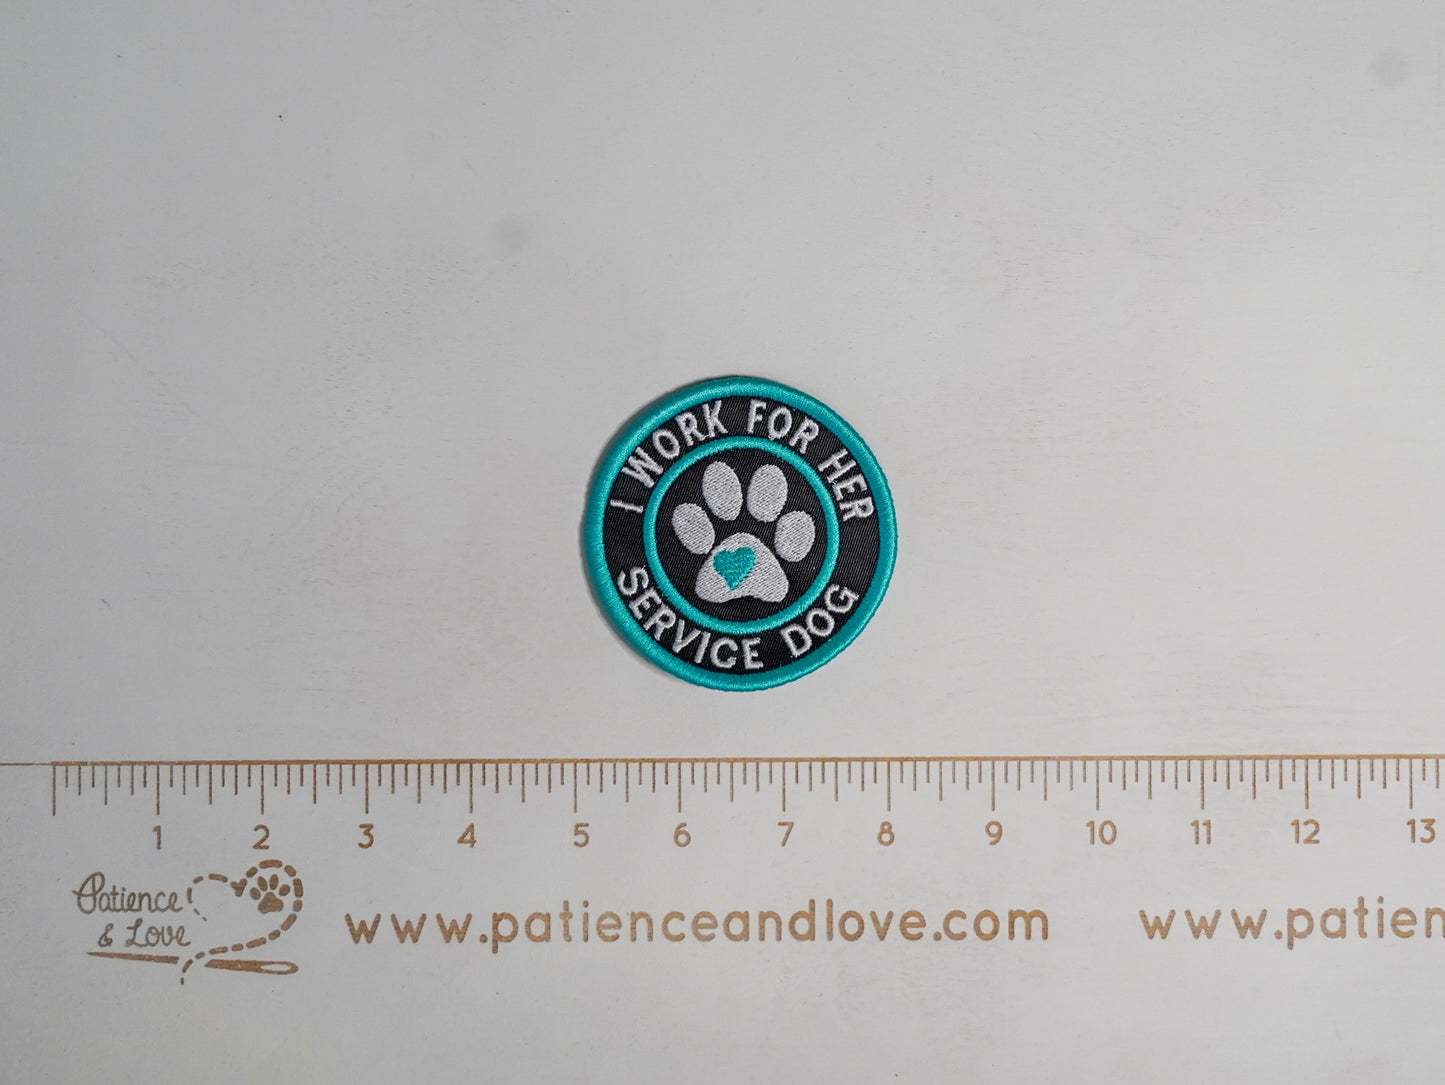 Premade/ Ready to ship patches- I work for her - service dog - with paw print in center, 3 inch round patch